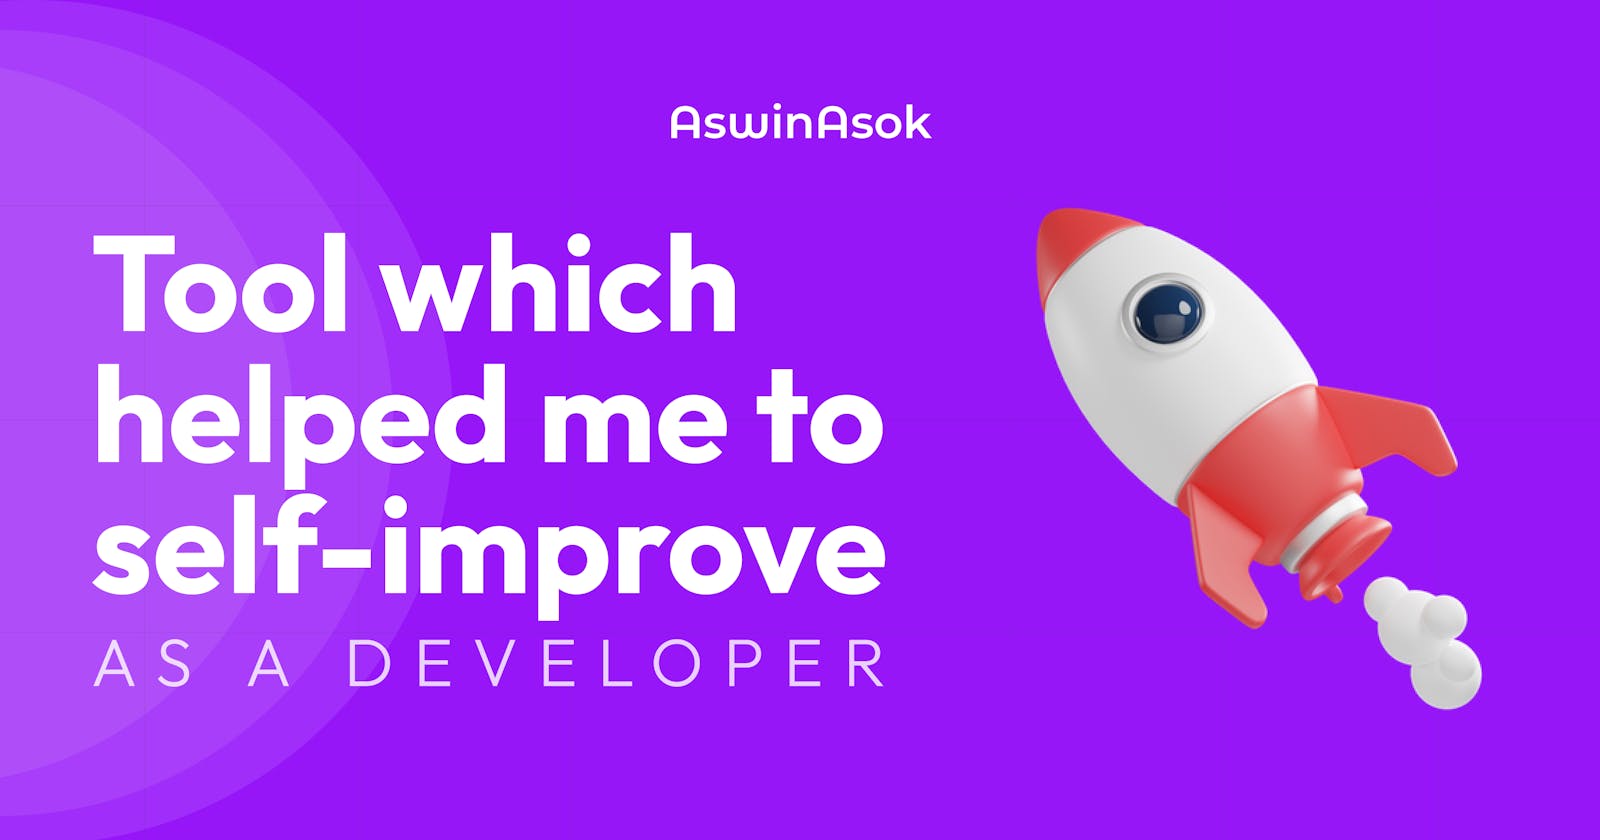 What have been the most helpful online tools to self-improve as a developer?